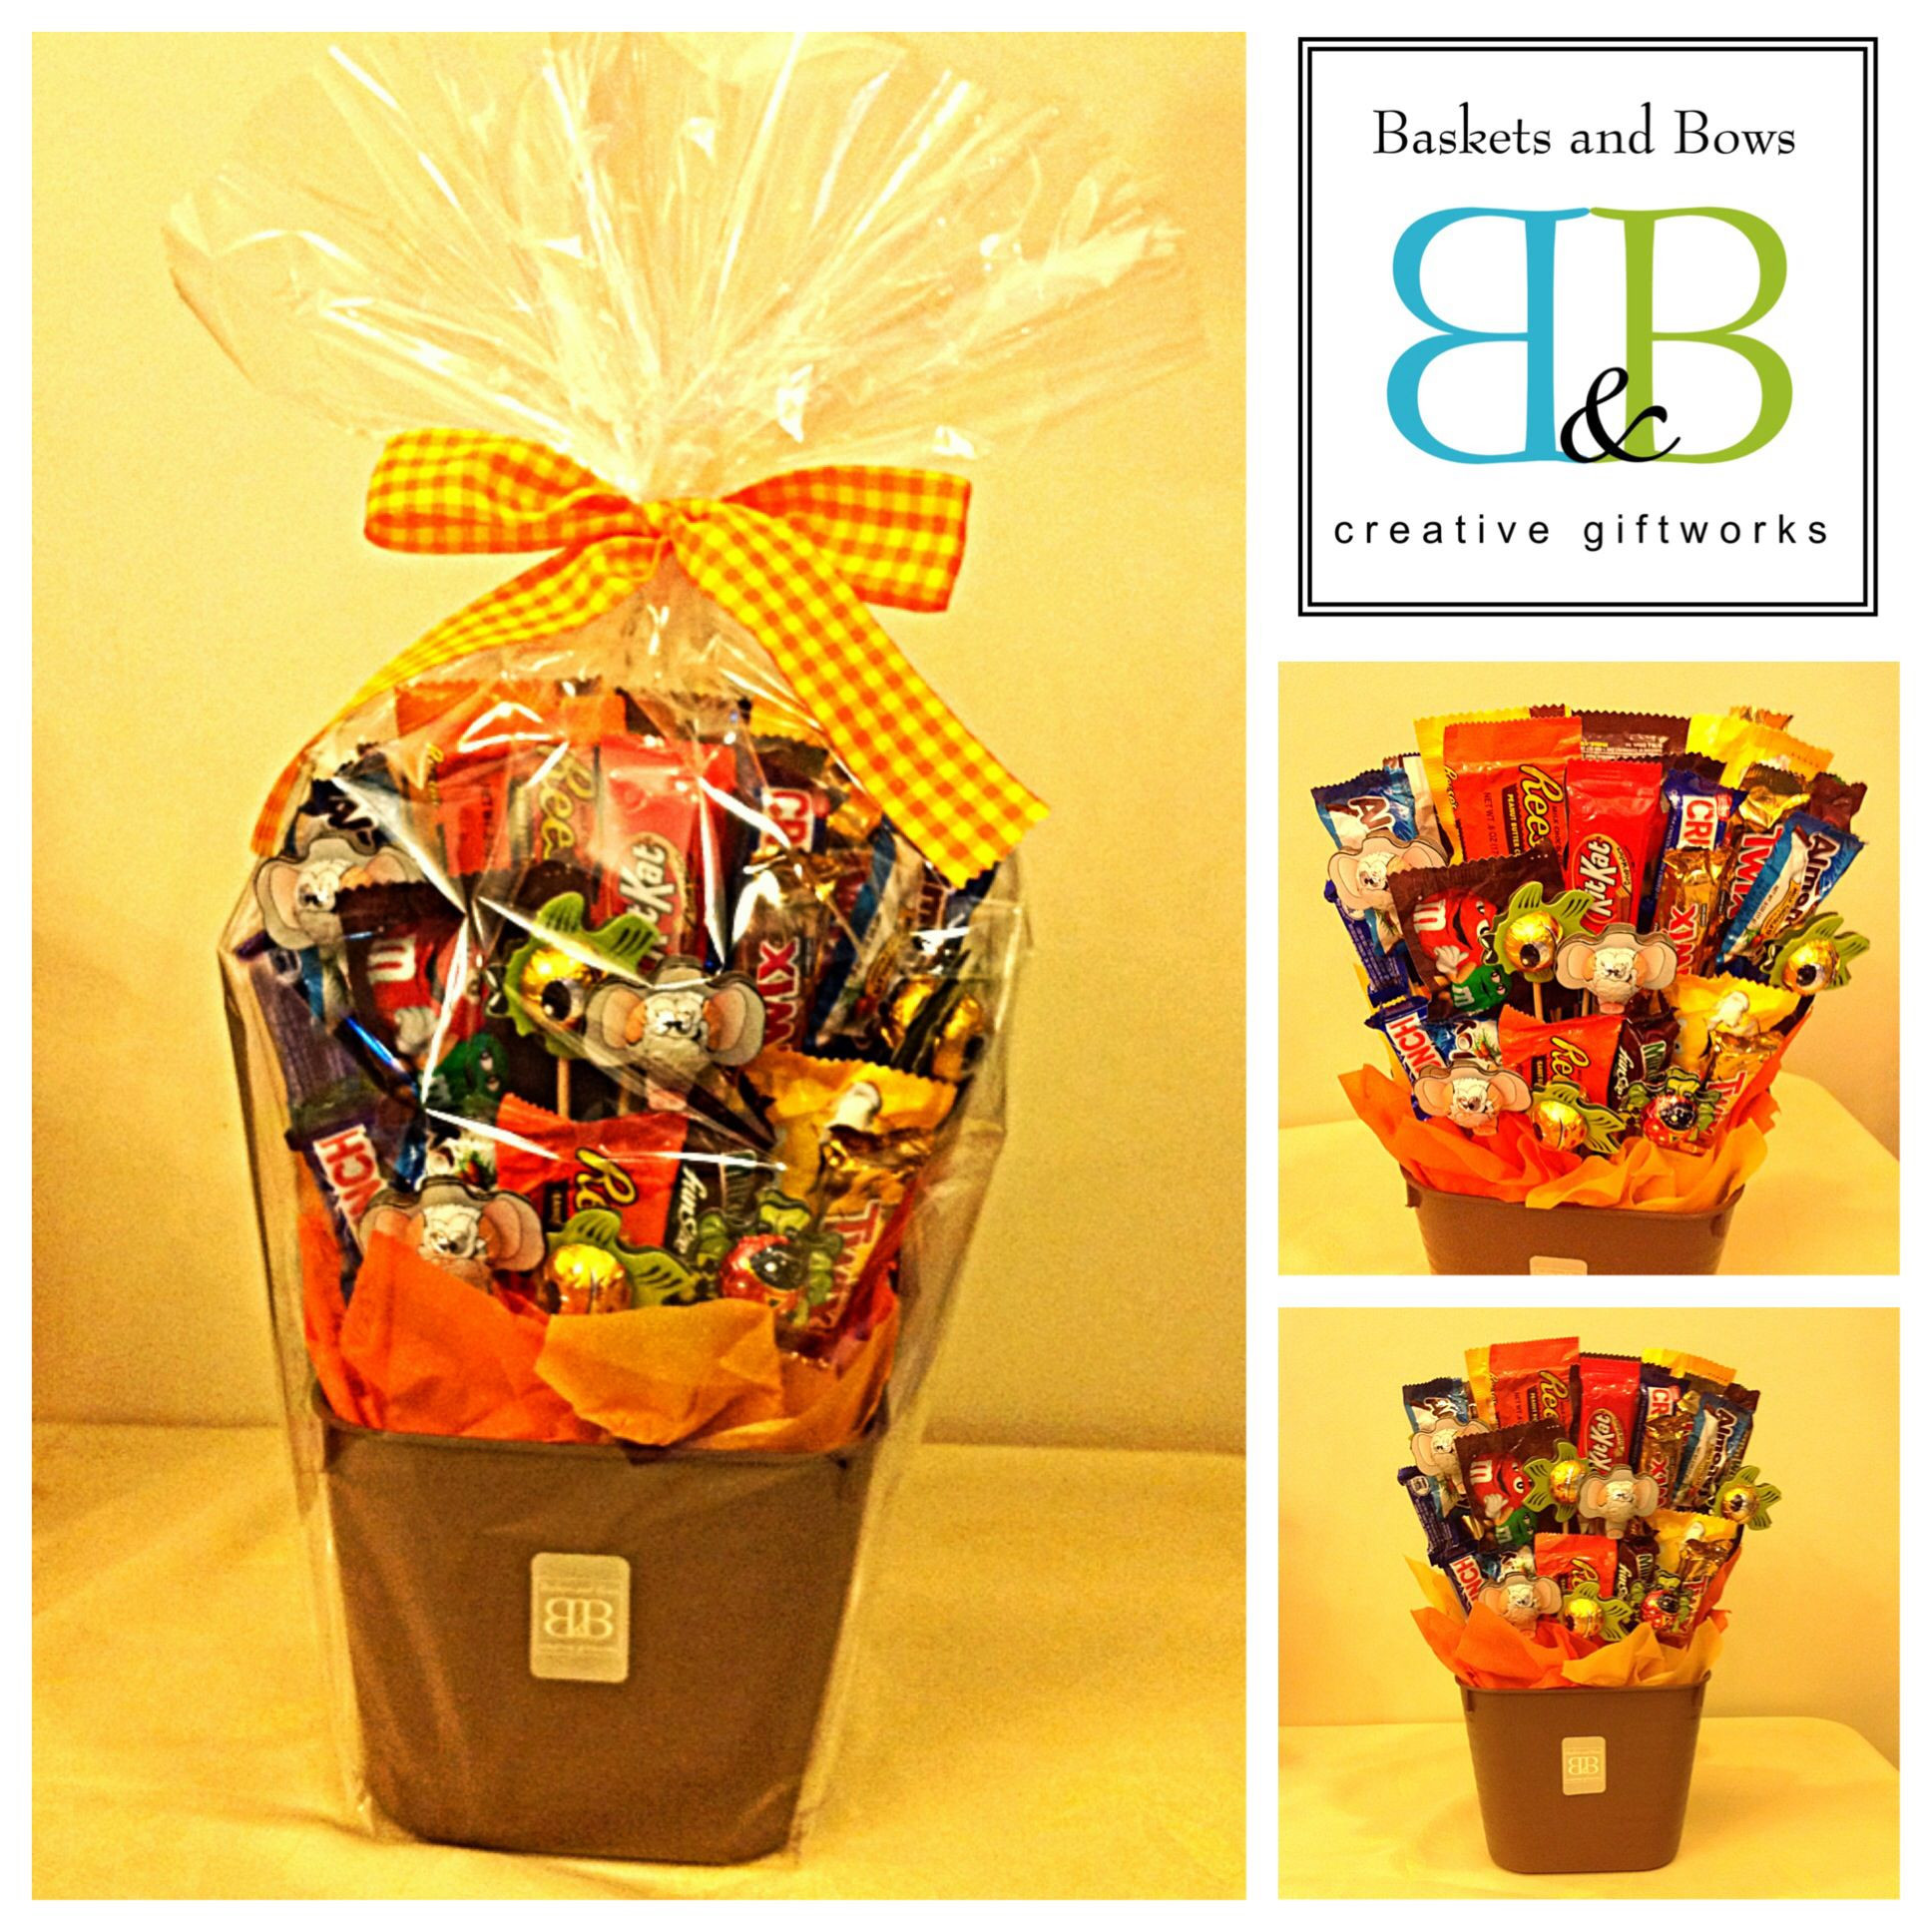 Chocolate Lovers Gift Basket Ideas
 Chocolate Lovers Gift Basket